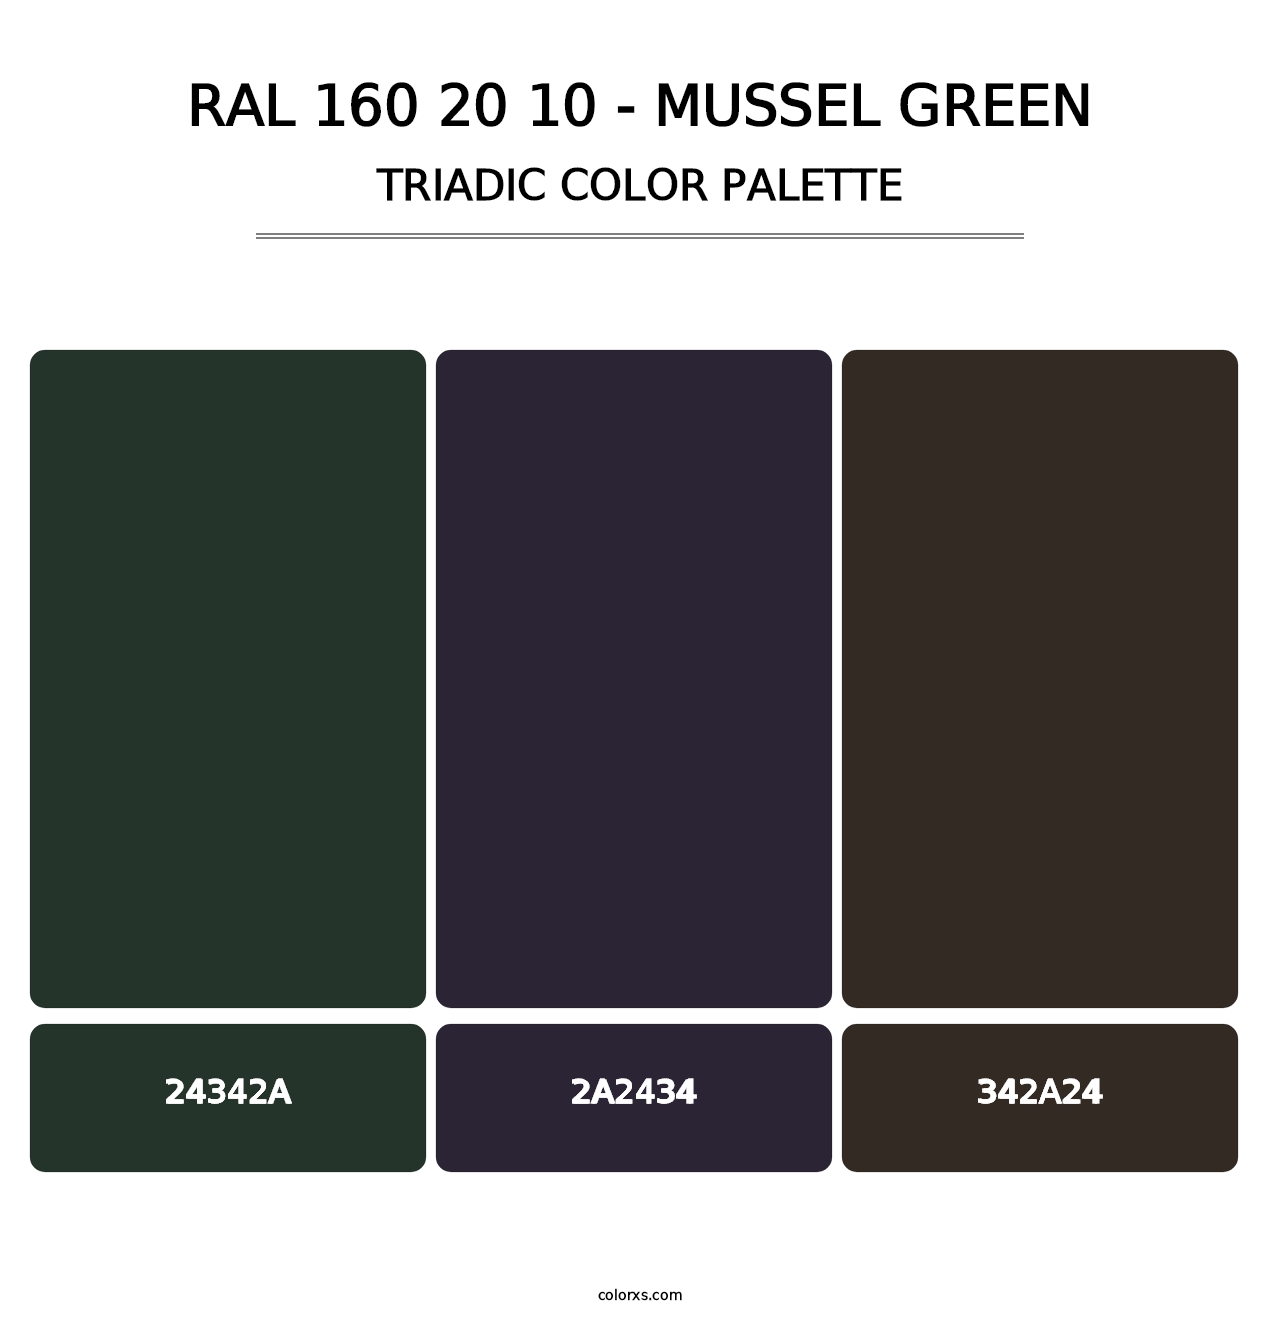 RAL 160 20 10 - Mussel Green - Triadic Color Palette